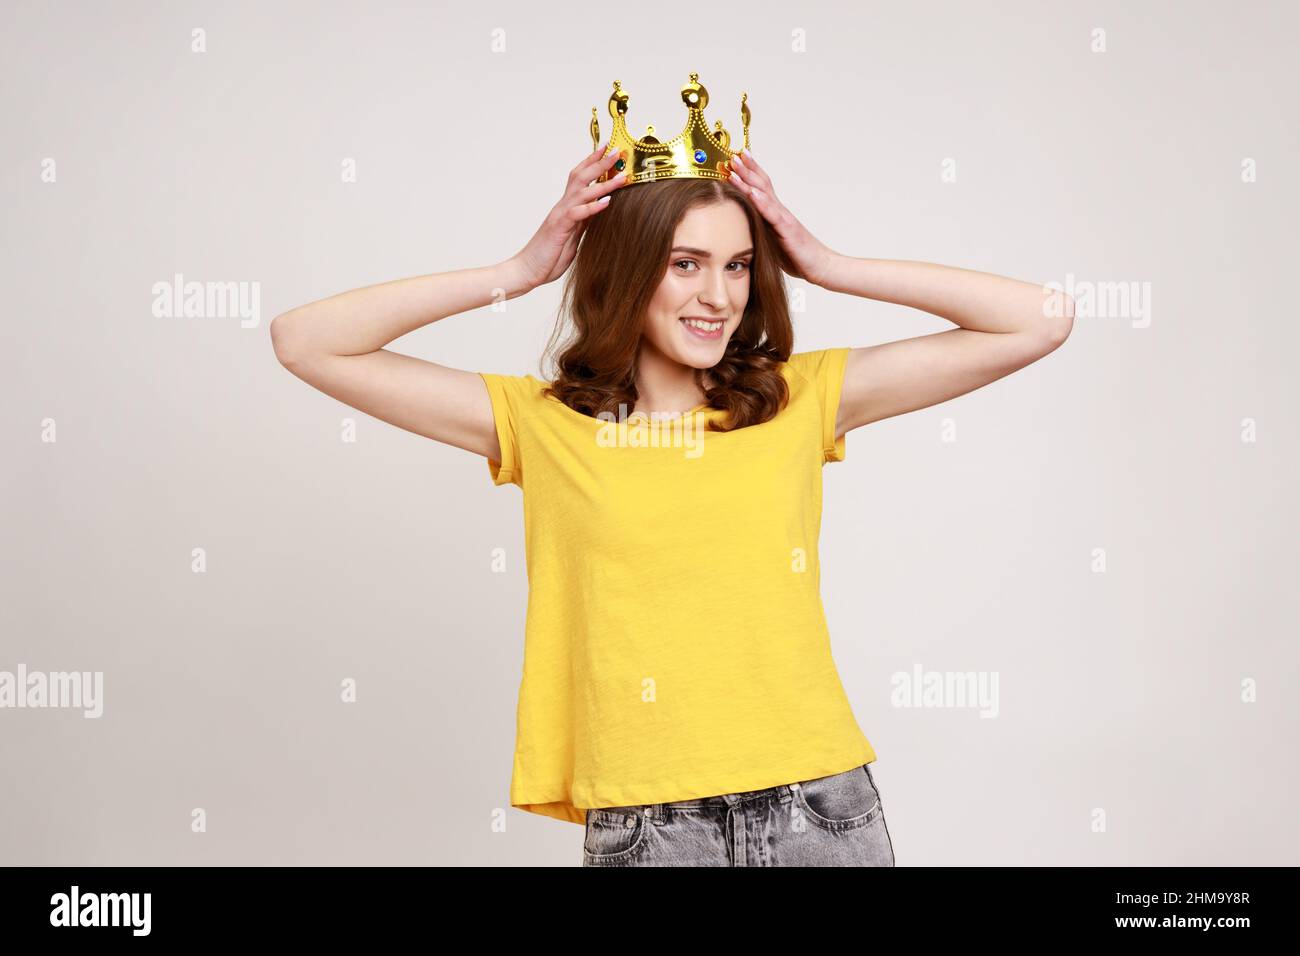 I am queen. Portrait of happy curly-haired teenager girl putting crown on head and smiling, self confidence, self-motivation and dreams to be best. Indoor studio shot isolated on gray background. Stock Photo